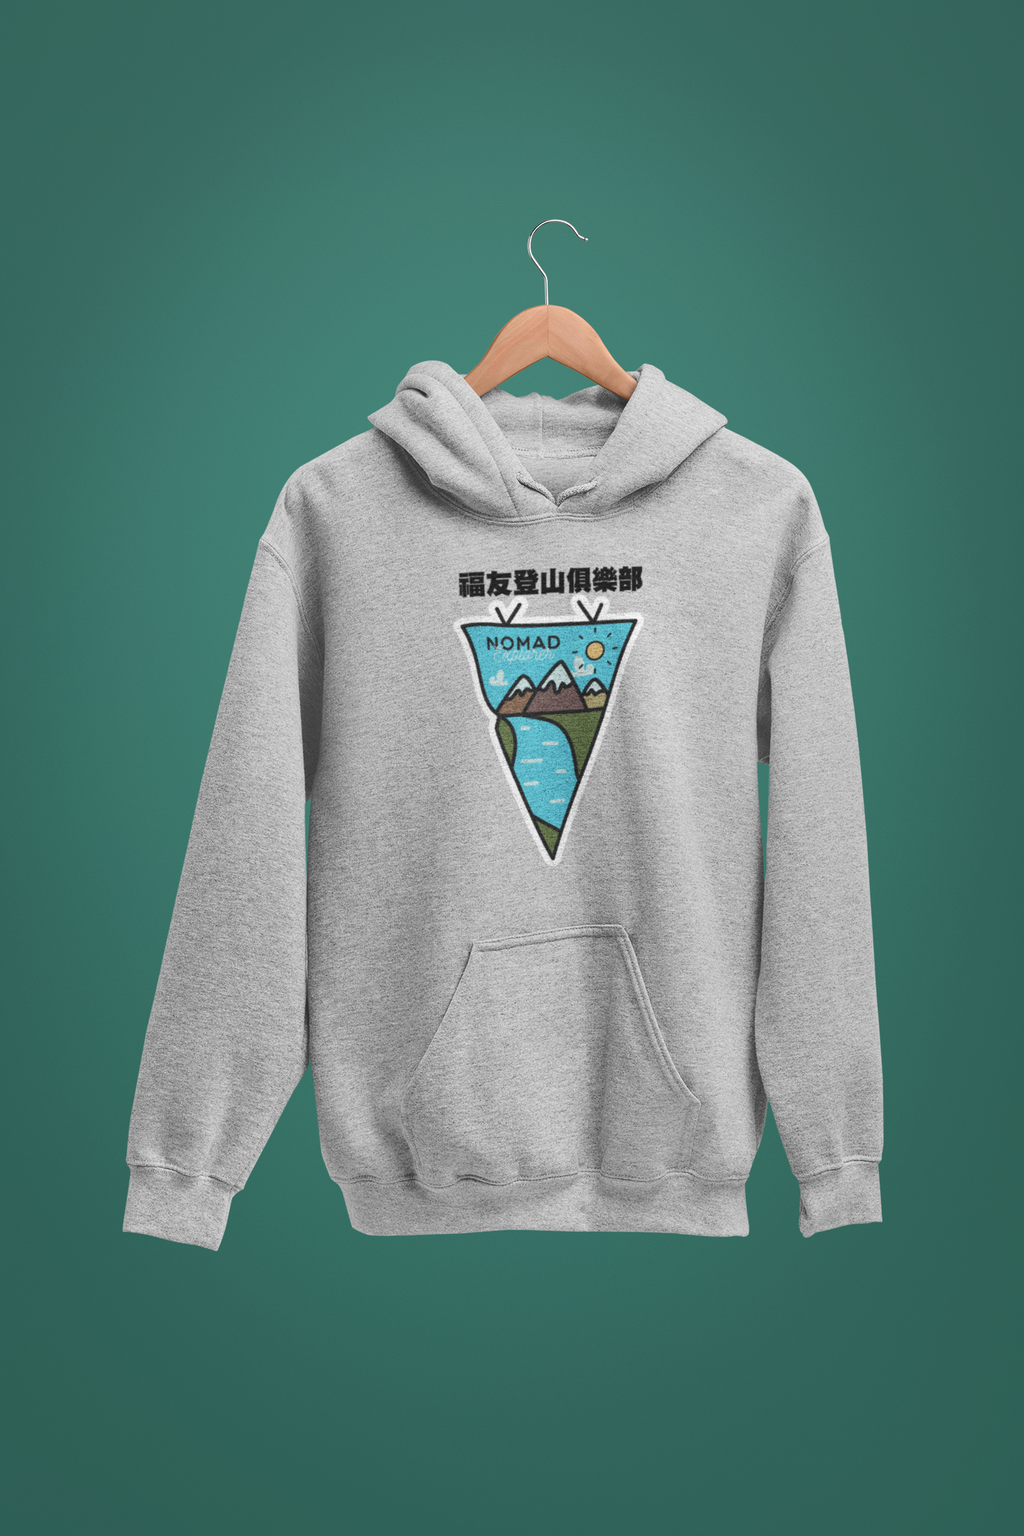 mockup-of-a-hoodie-in-a-hanger-against-a-solid-background-27735 (1).png